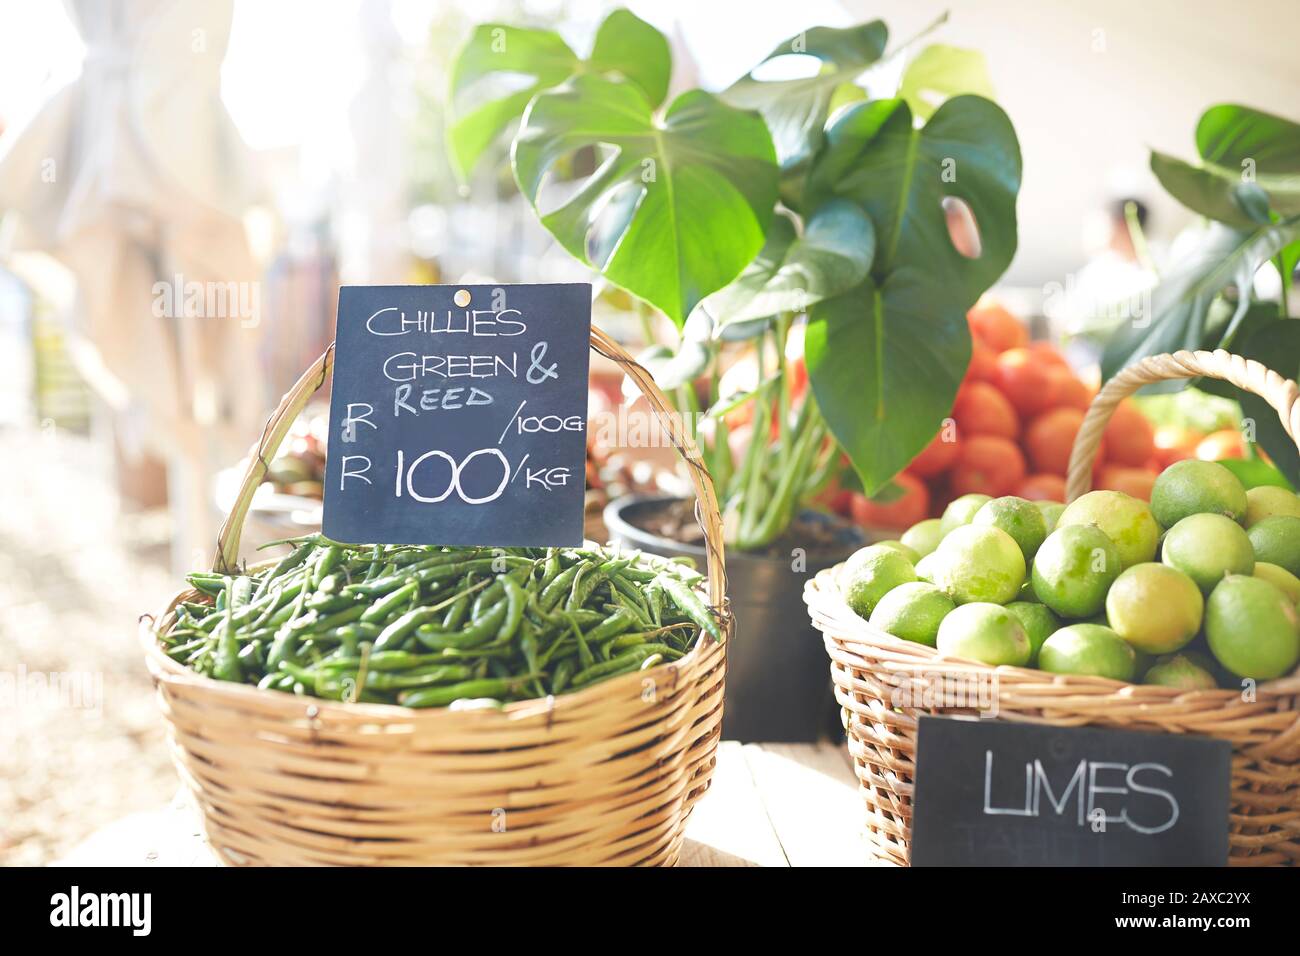 Baskets of fresh green chills and limes at farmer’s market Stock Photo